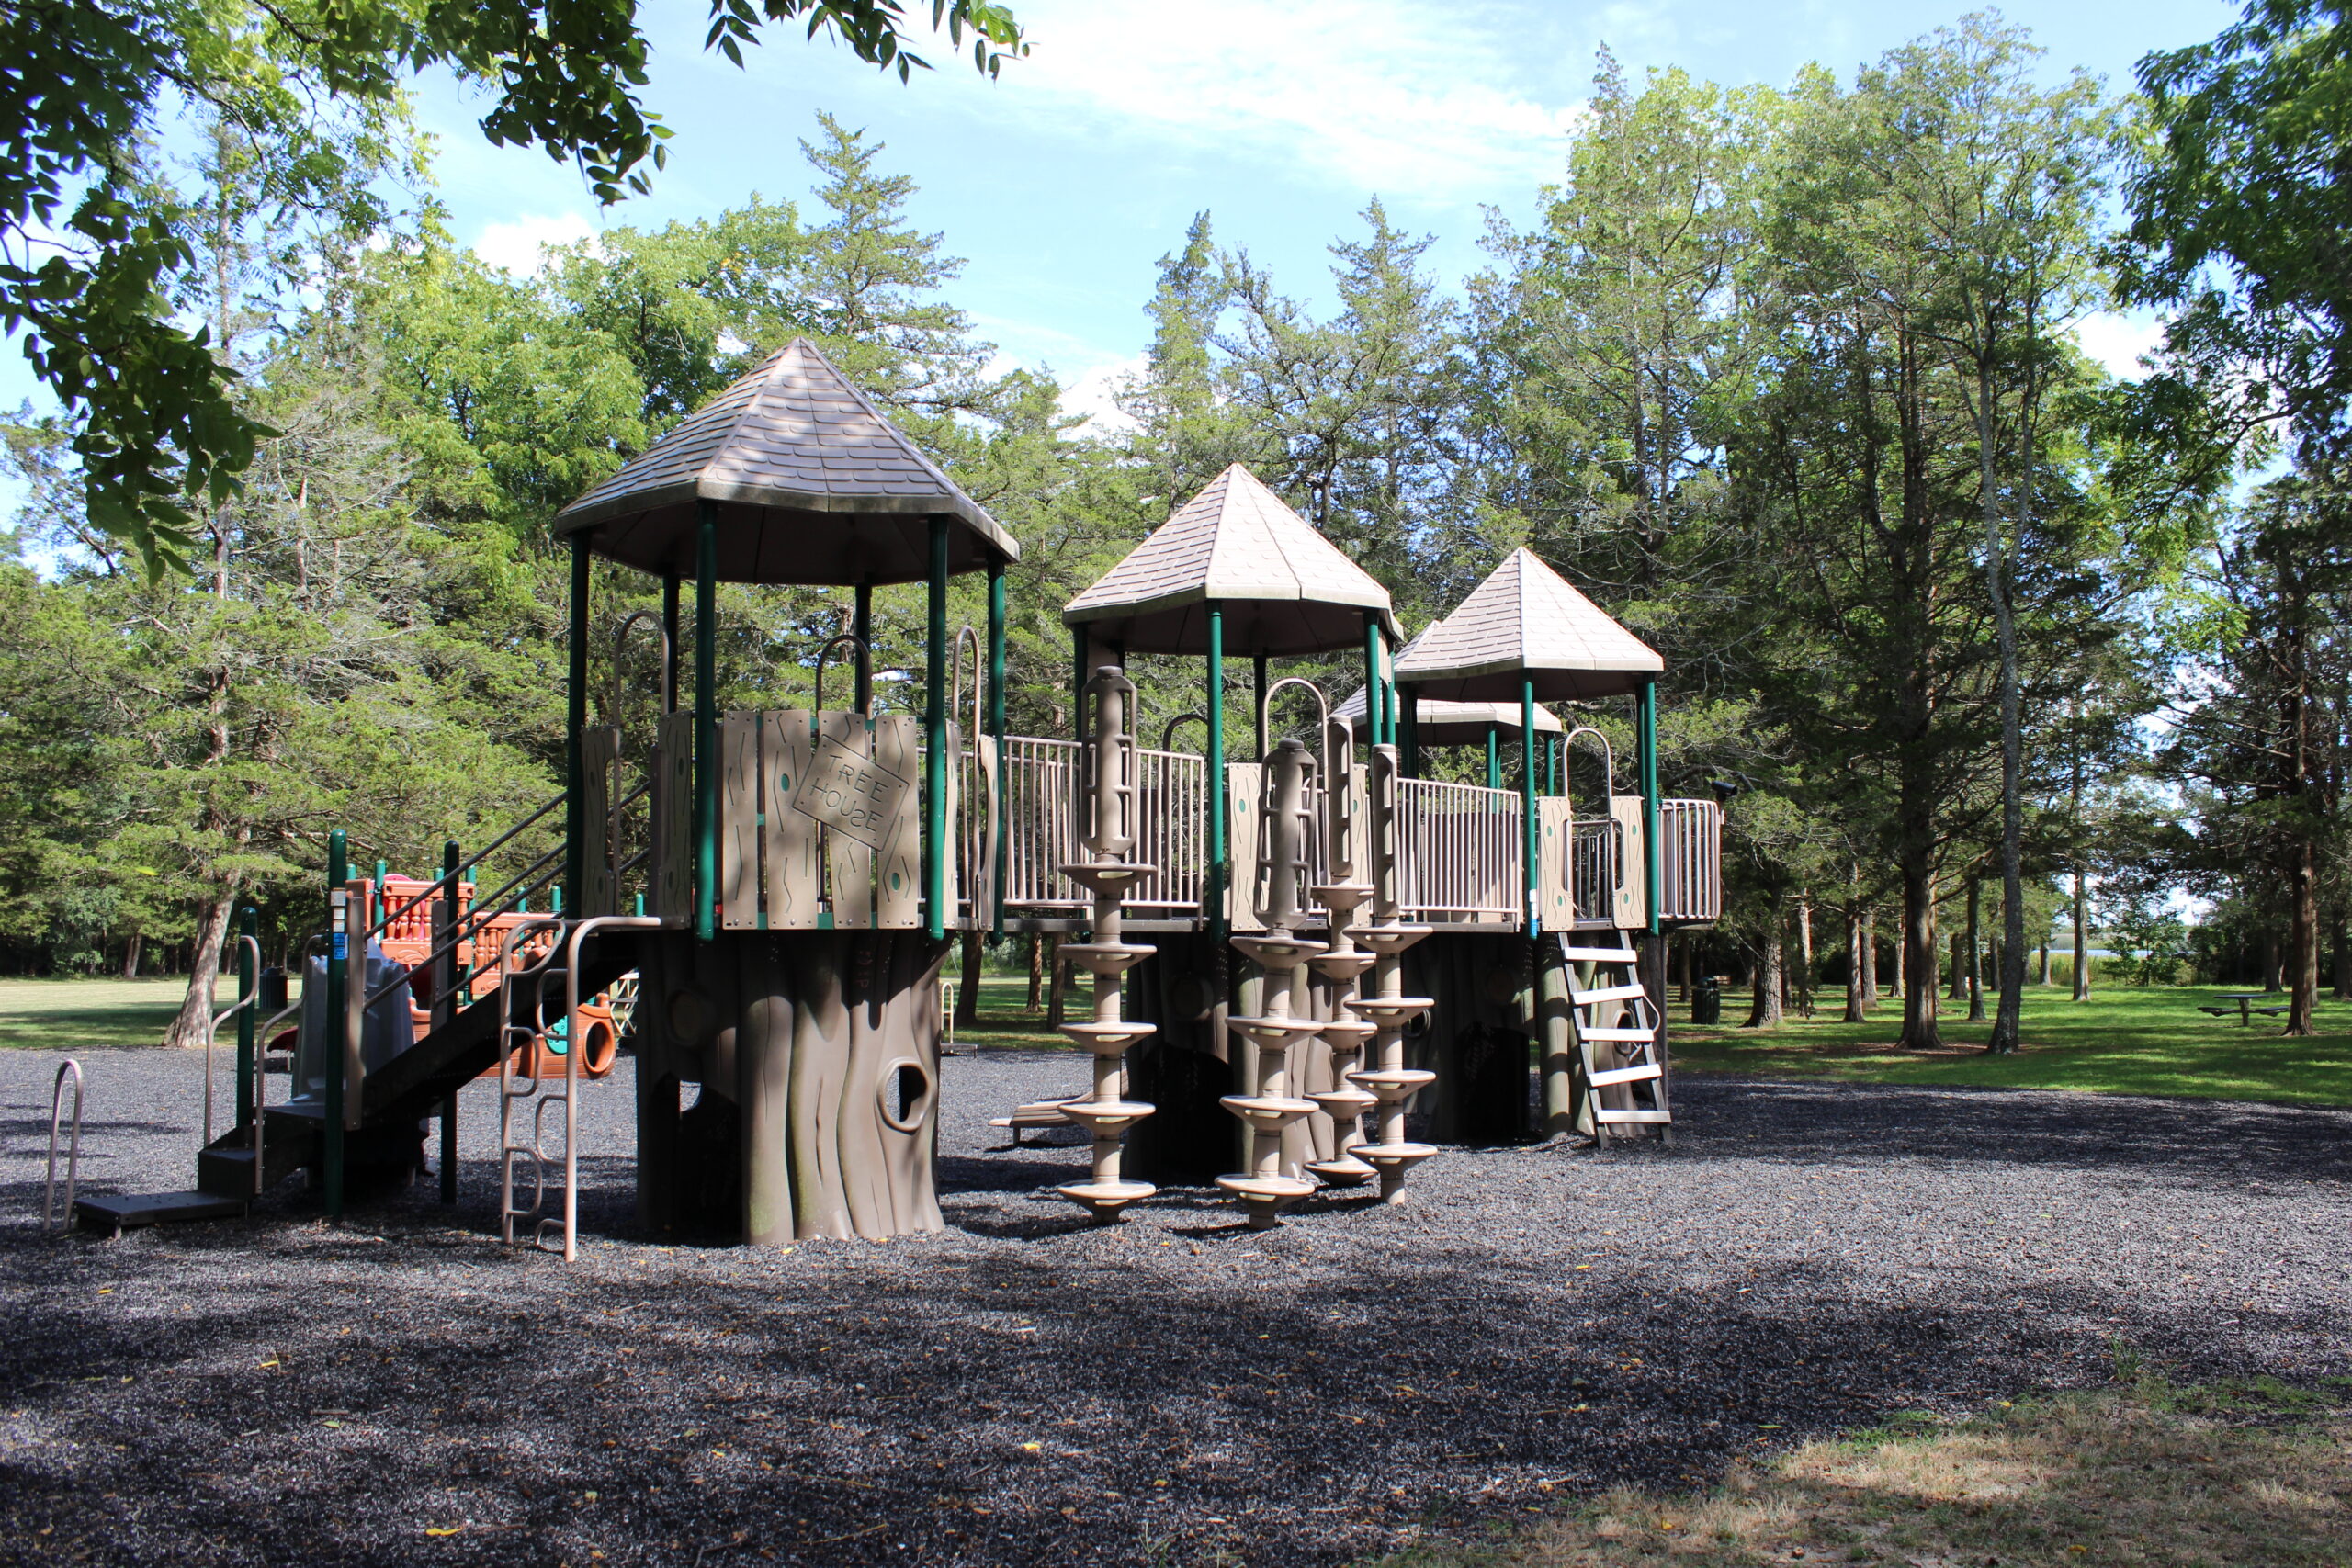 Back Estell Manor Park Playgrounds in Mays Landing NJ - Wide image - treehouse playground climbing ladder side